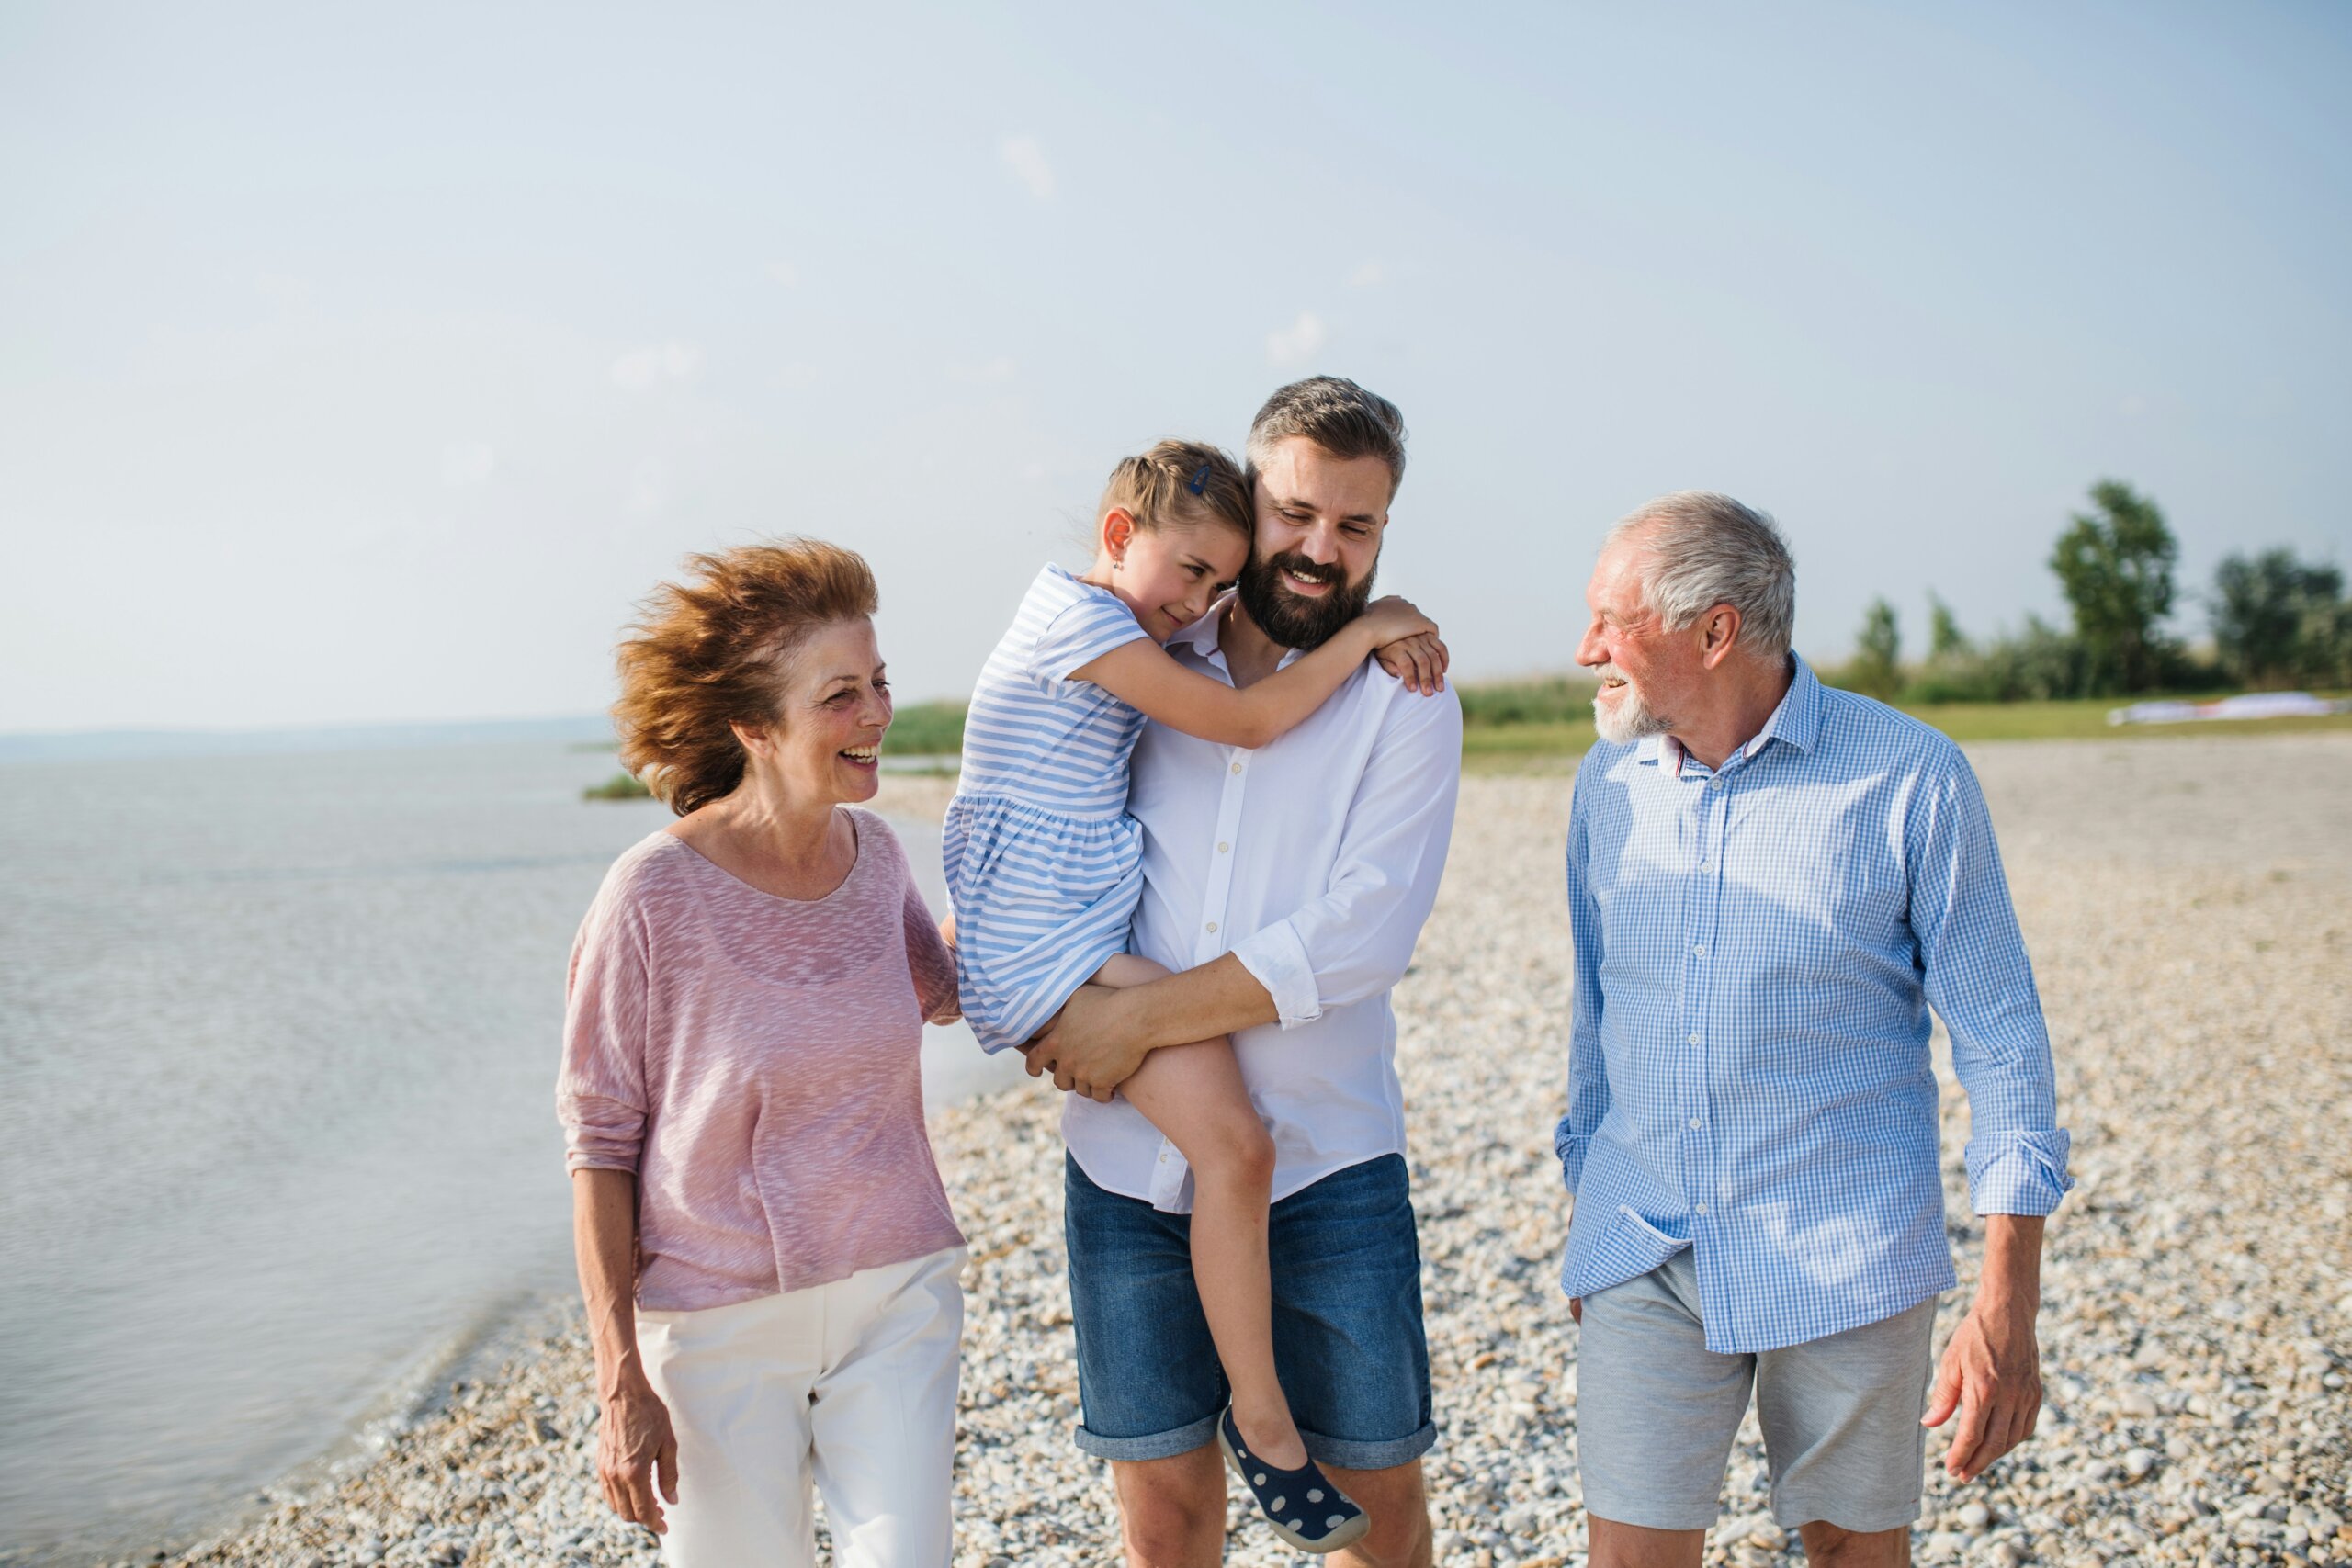 Older woman and man with young man holding child at beach